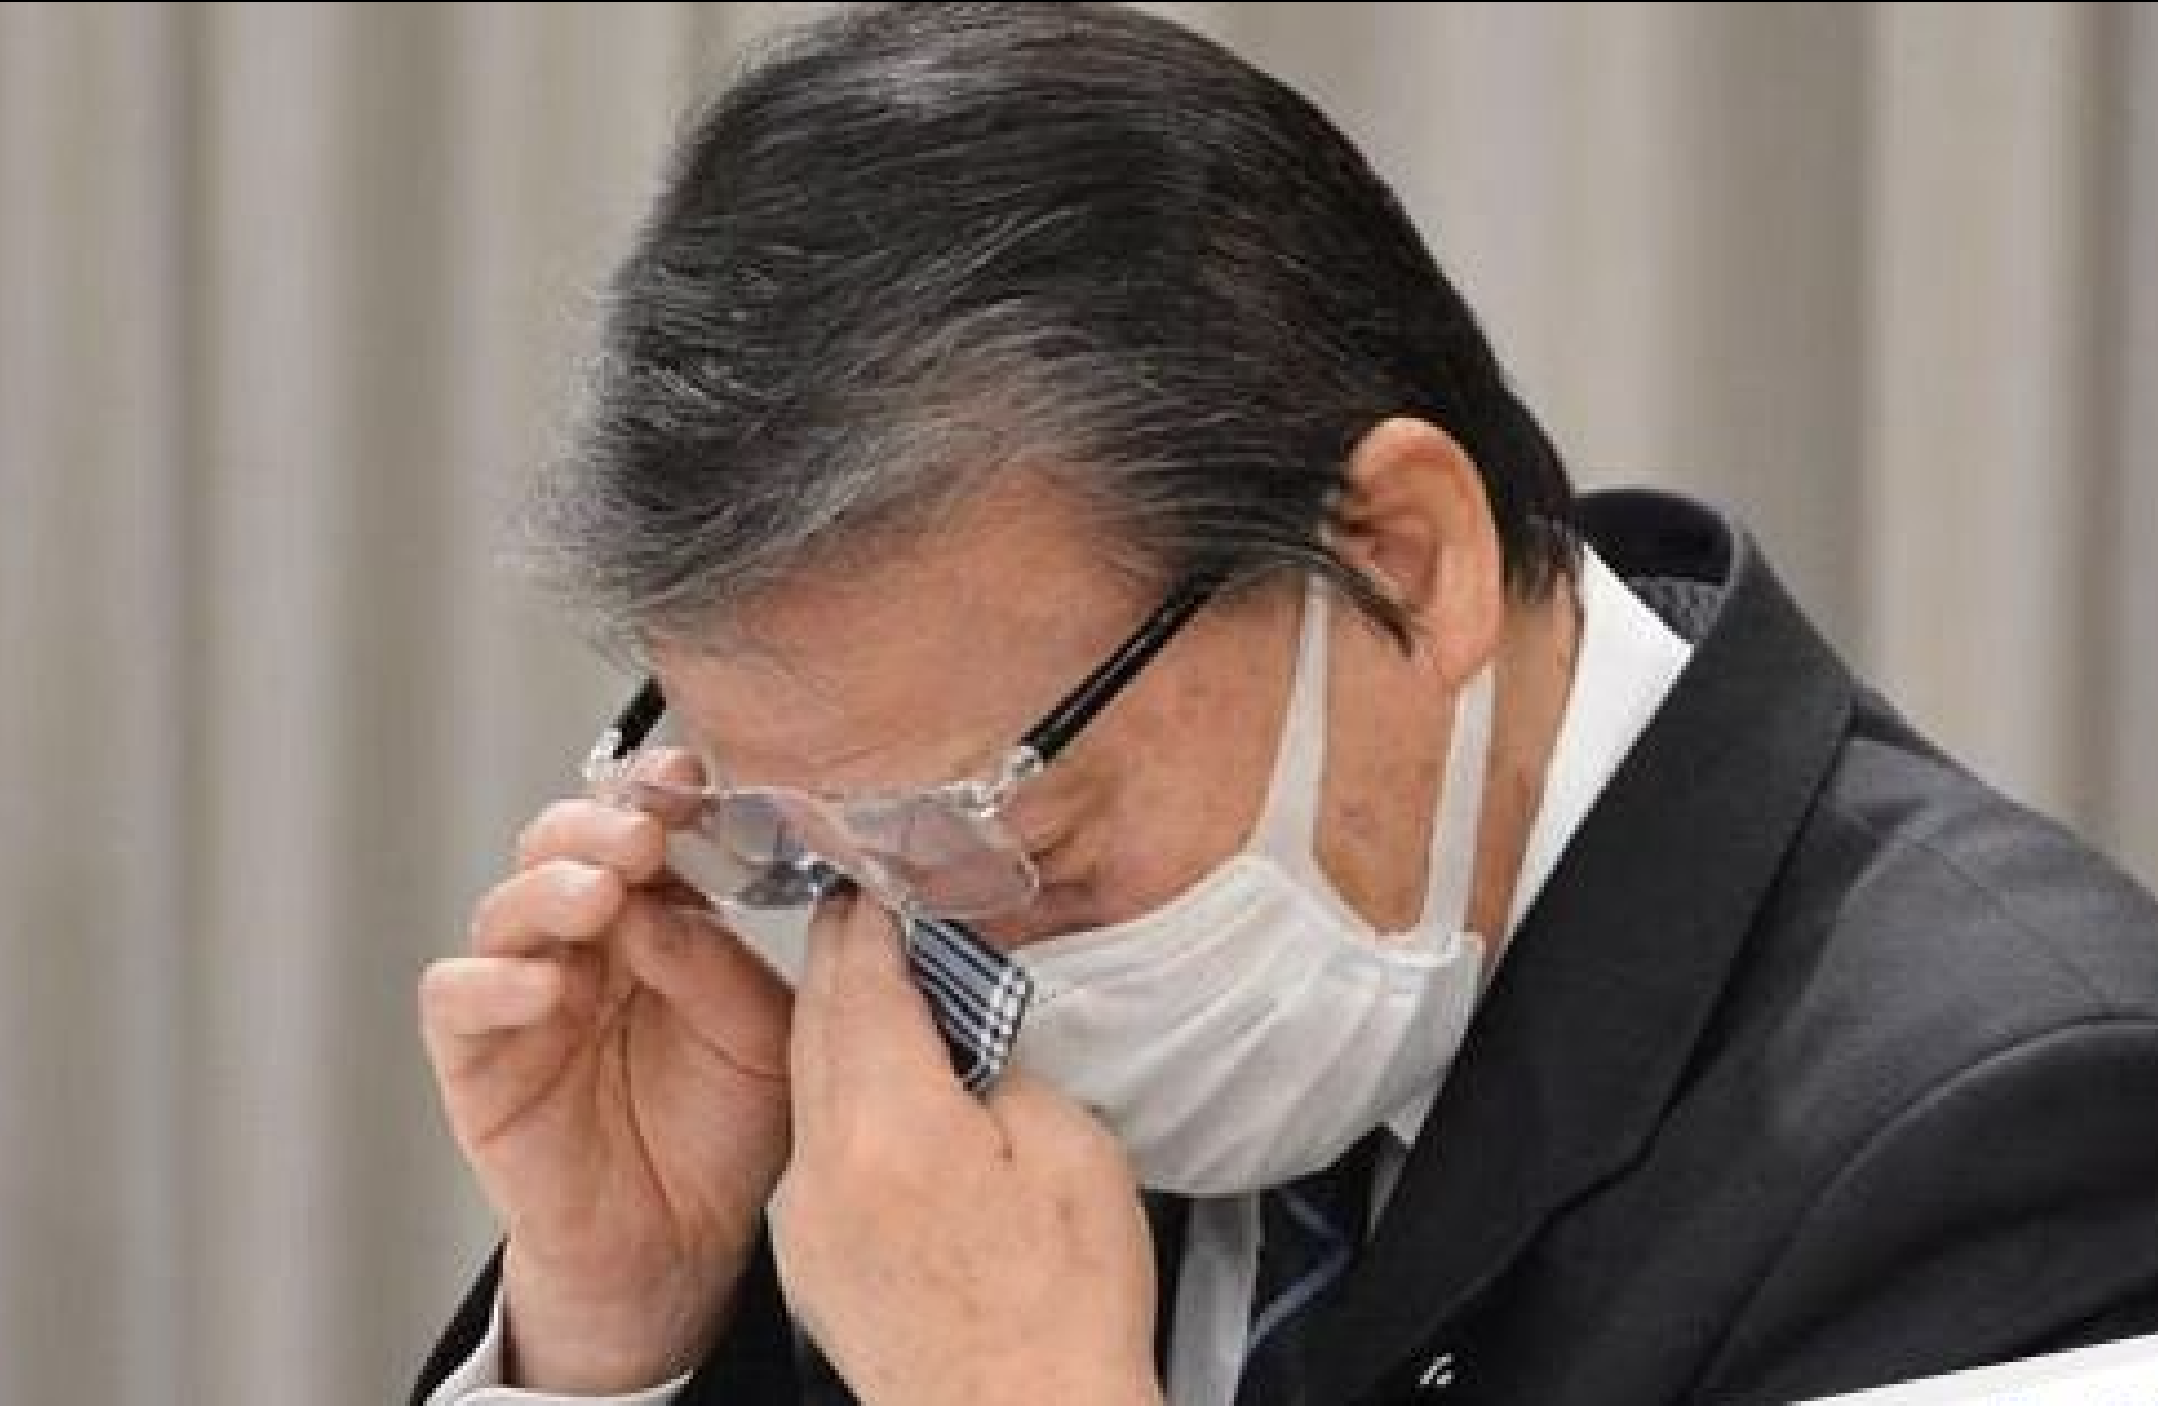 Japan mayor sobs as he quits, vows innocence in over 99 sexual harassment claims